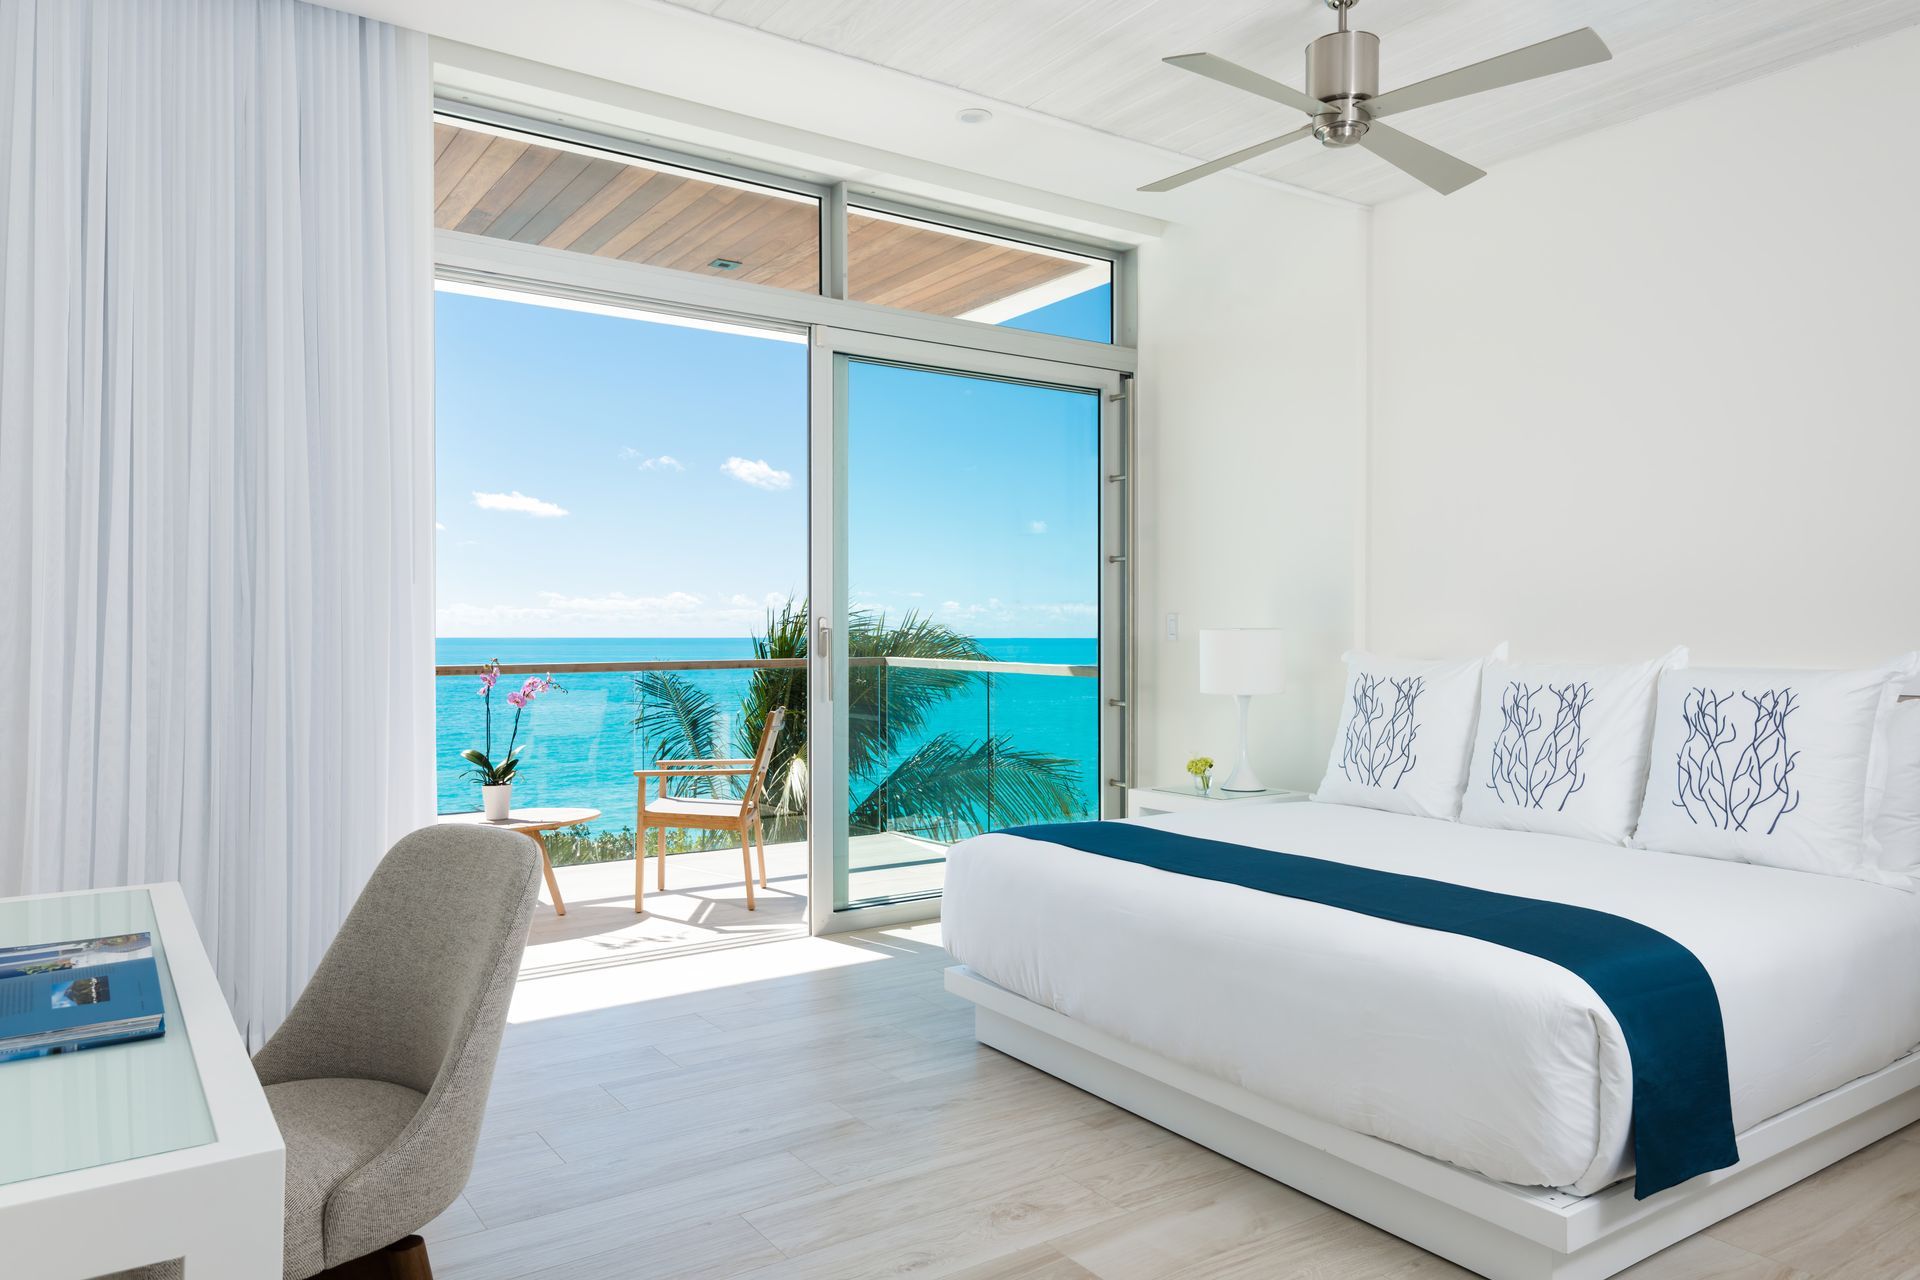 Five Bedroom Amuse Villas With Two Pools + Sun Deck + Water Slide + Beach